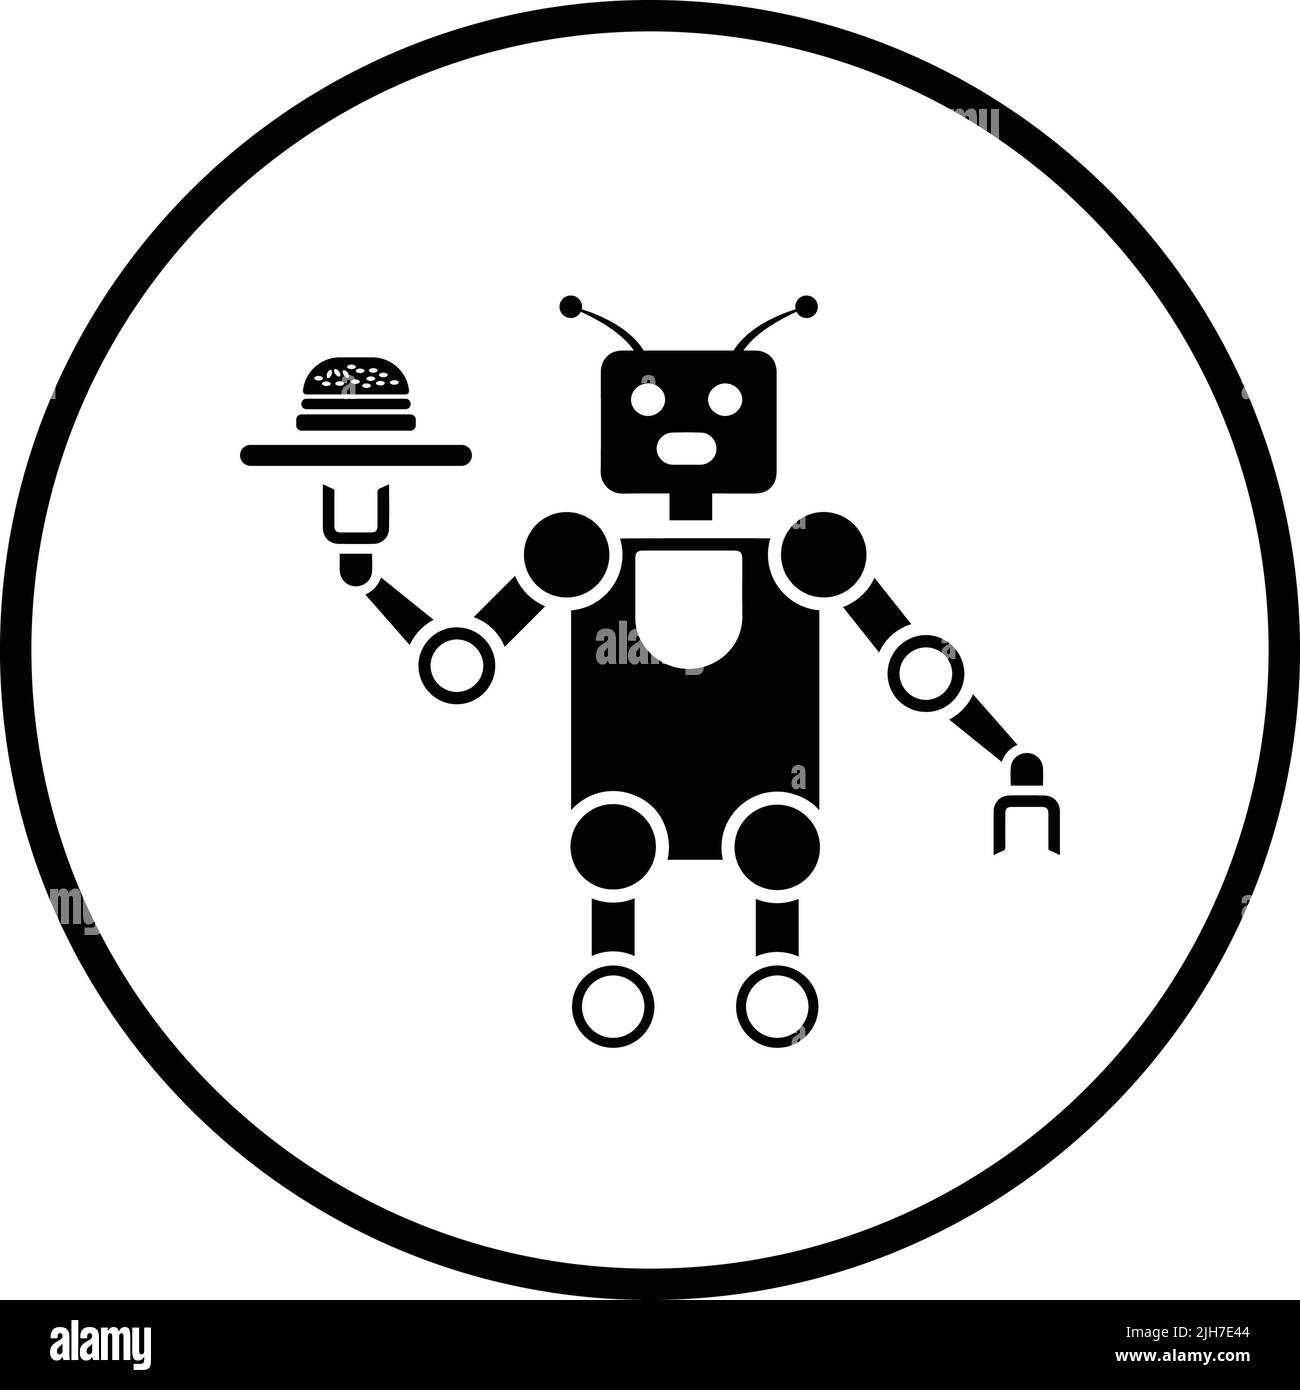 Automation, fast, food, robot icon - Vector EPS file. Perfect use for print media, web, stock images, commercial use or any kind of design project. Stock Vector